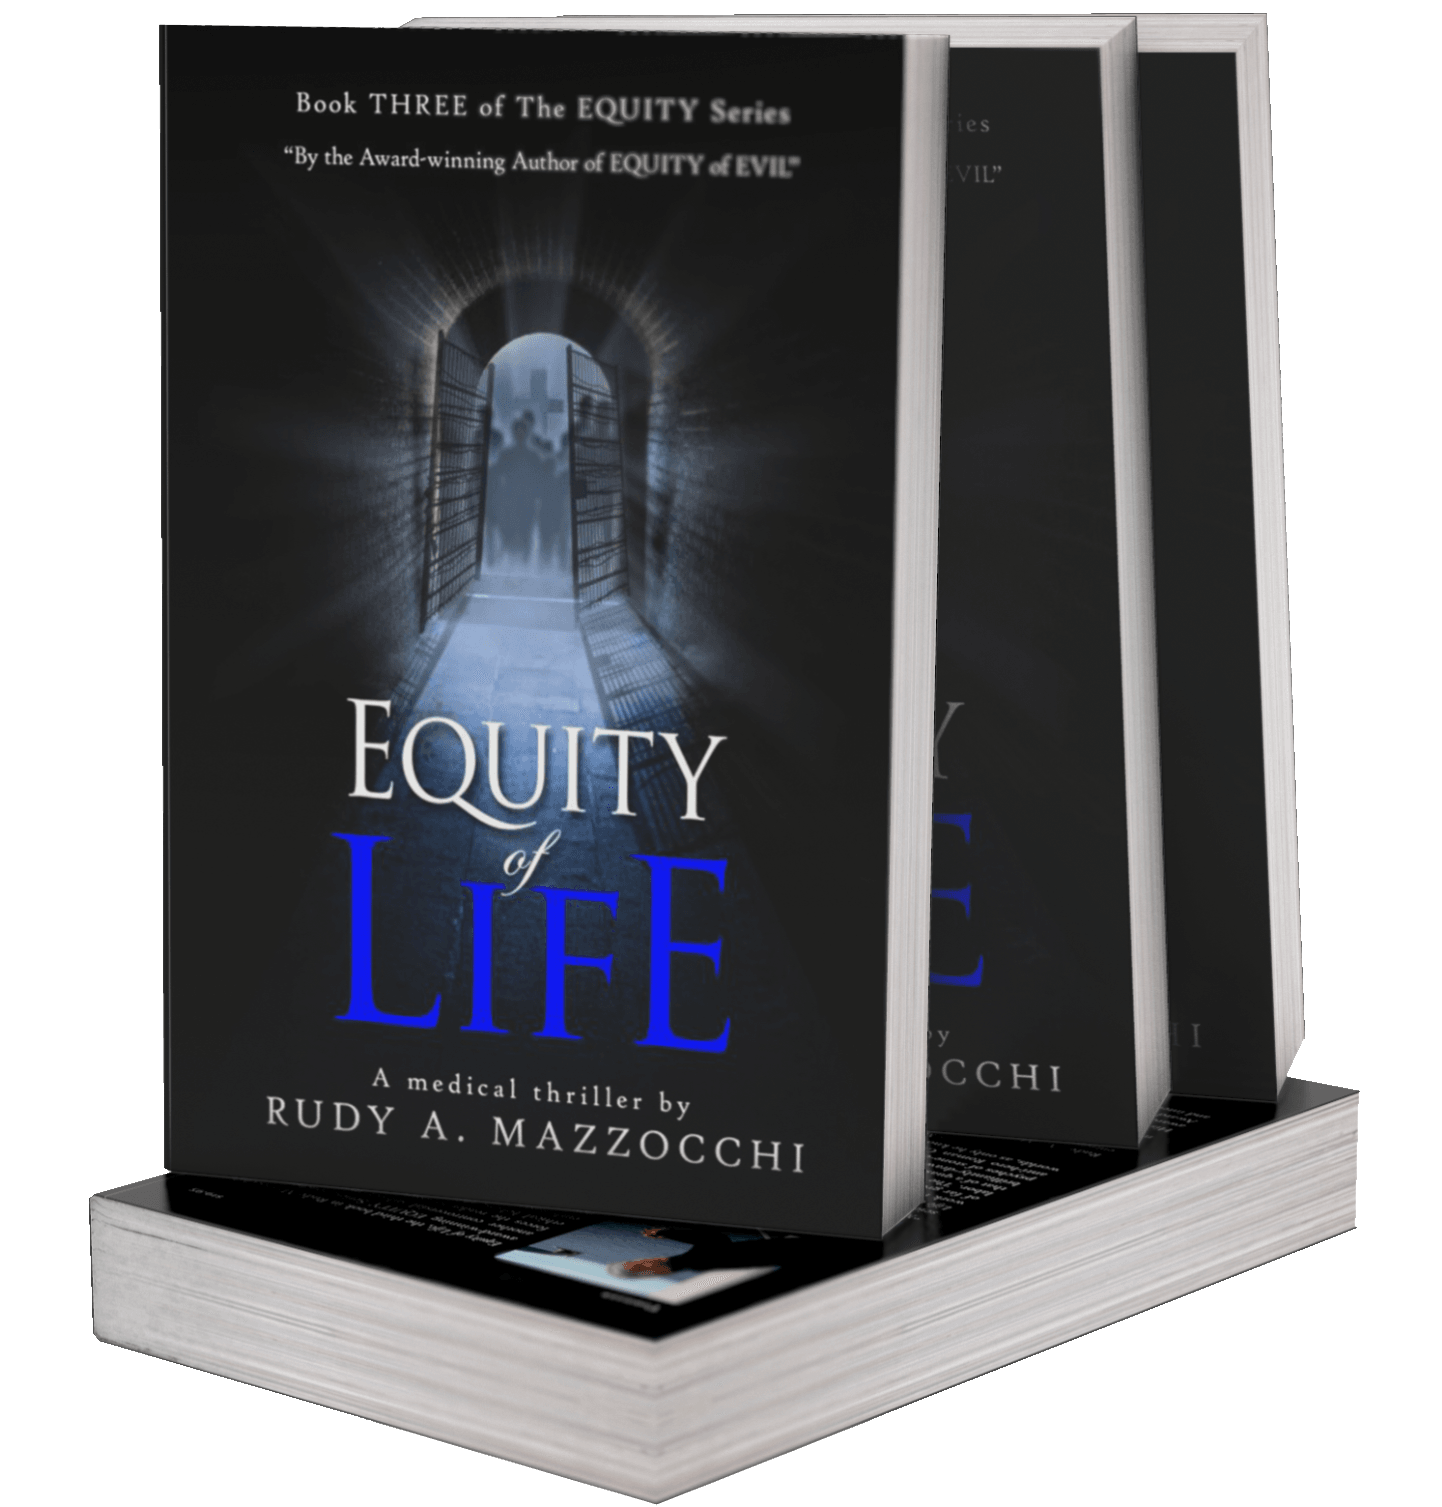 EQUITY OF life